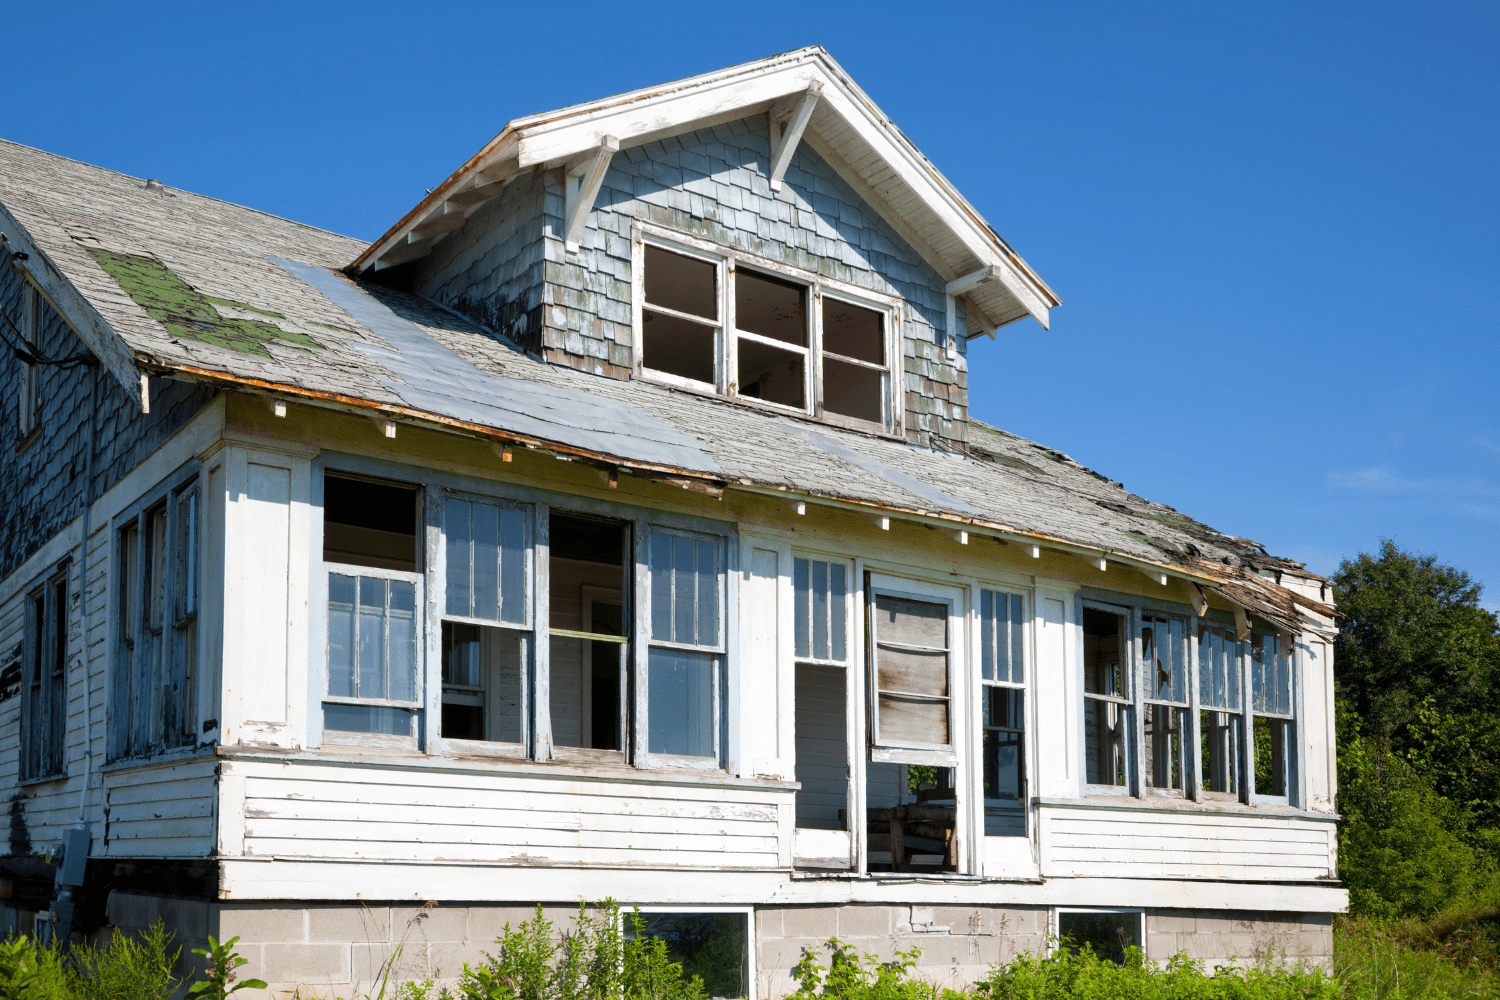 Choosing a fixer-upper property with confidence